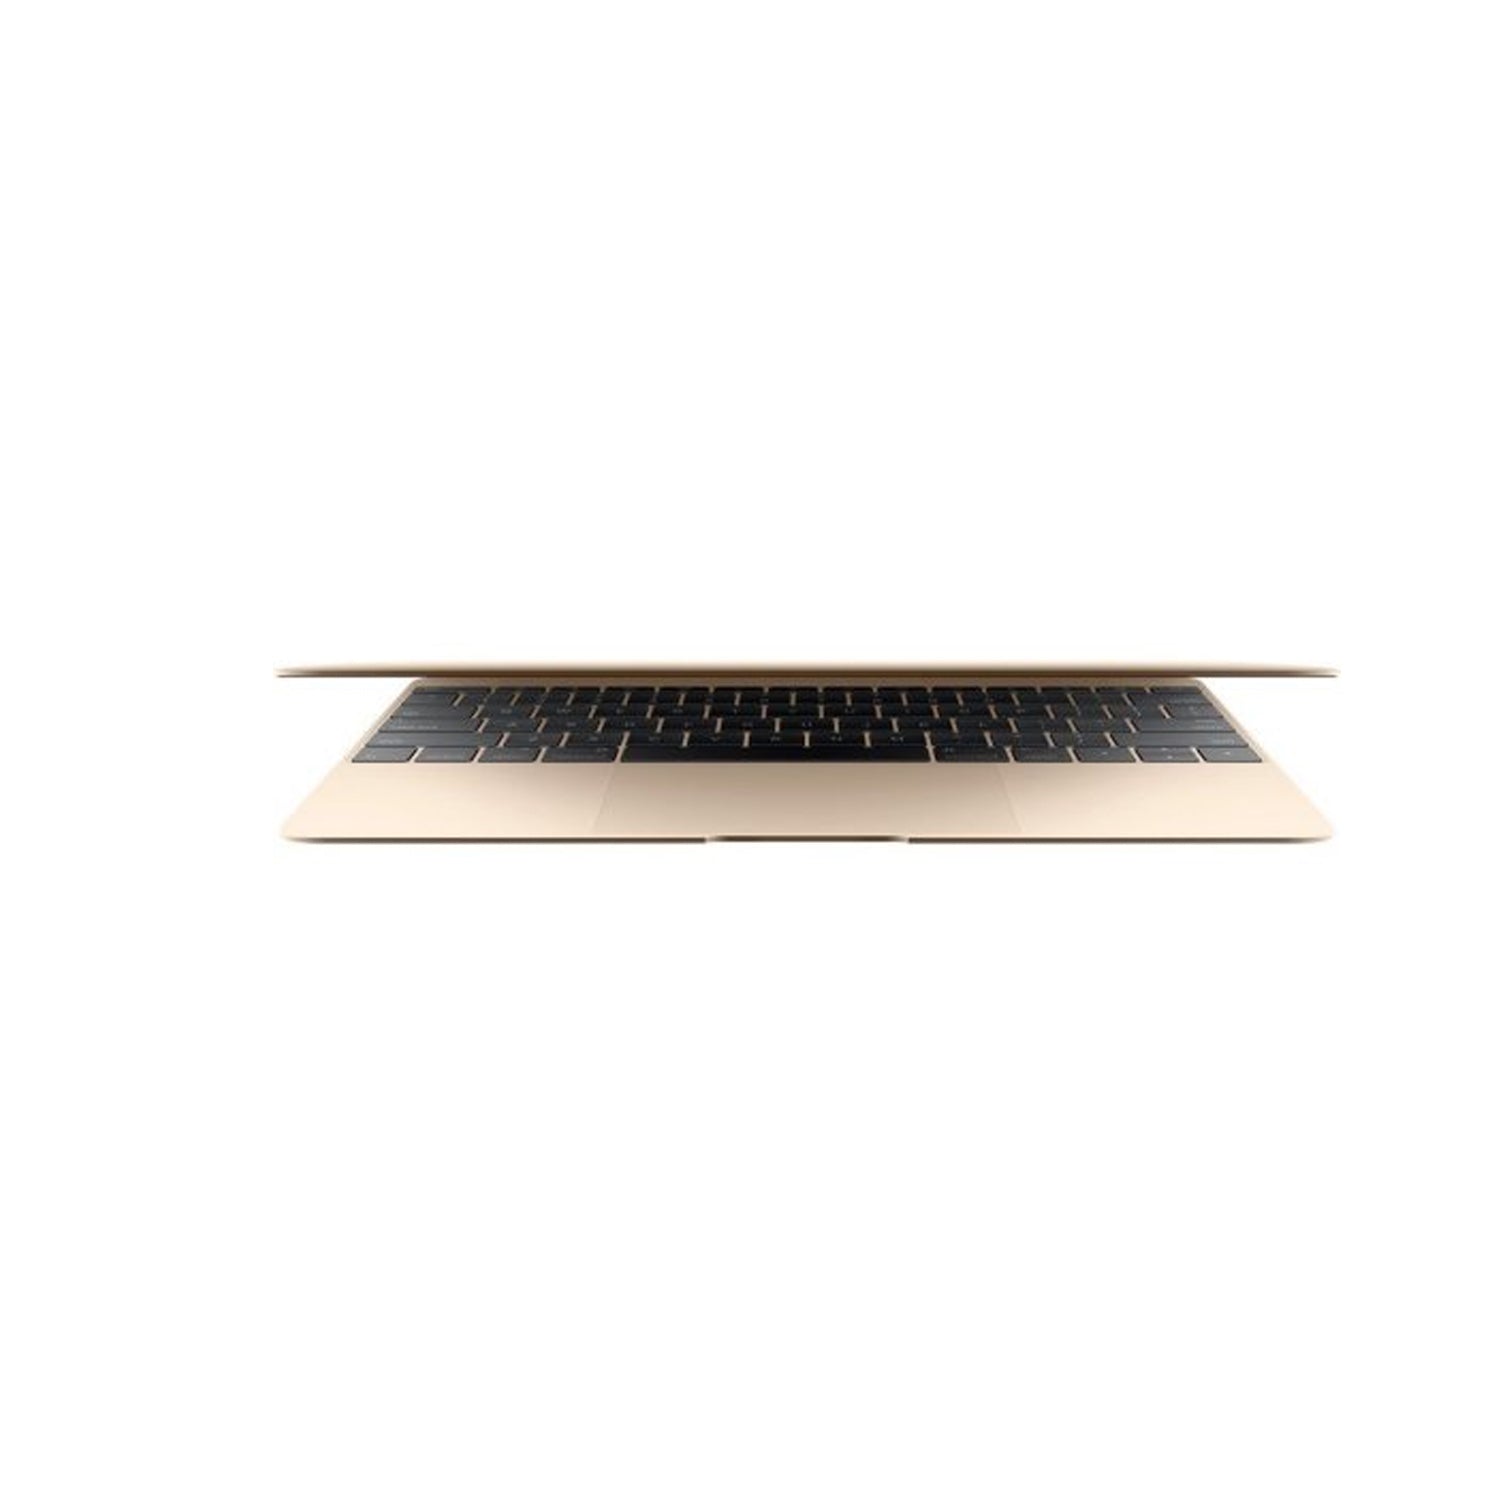 Apple Macbook 12 Inch Laptop, Retina, 512GB Gold (Spanish Keyboard) MNYL2E/A with Apple AirPods Pro